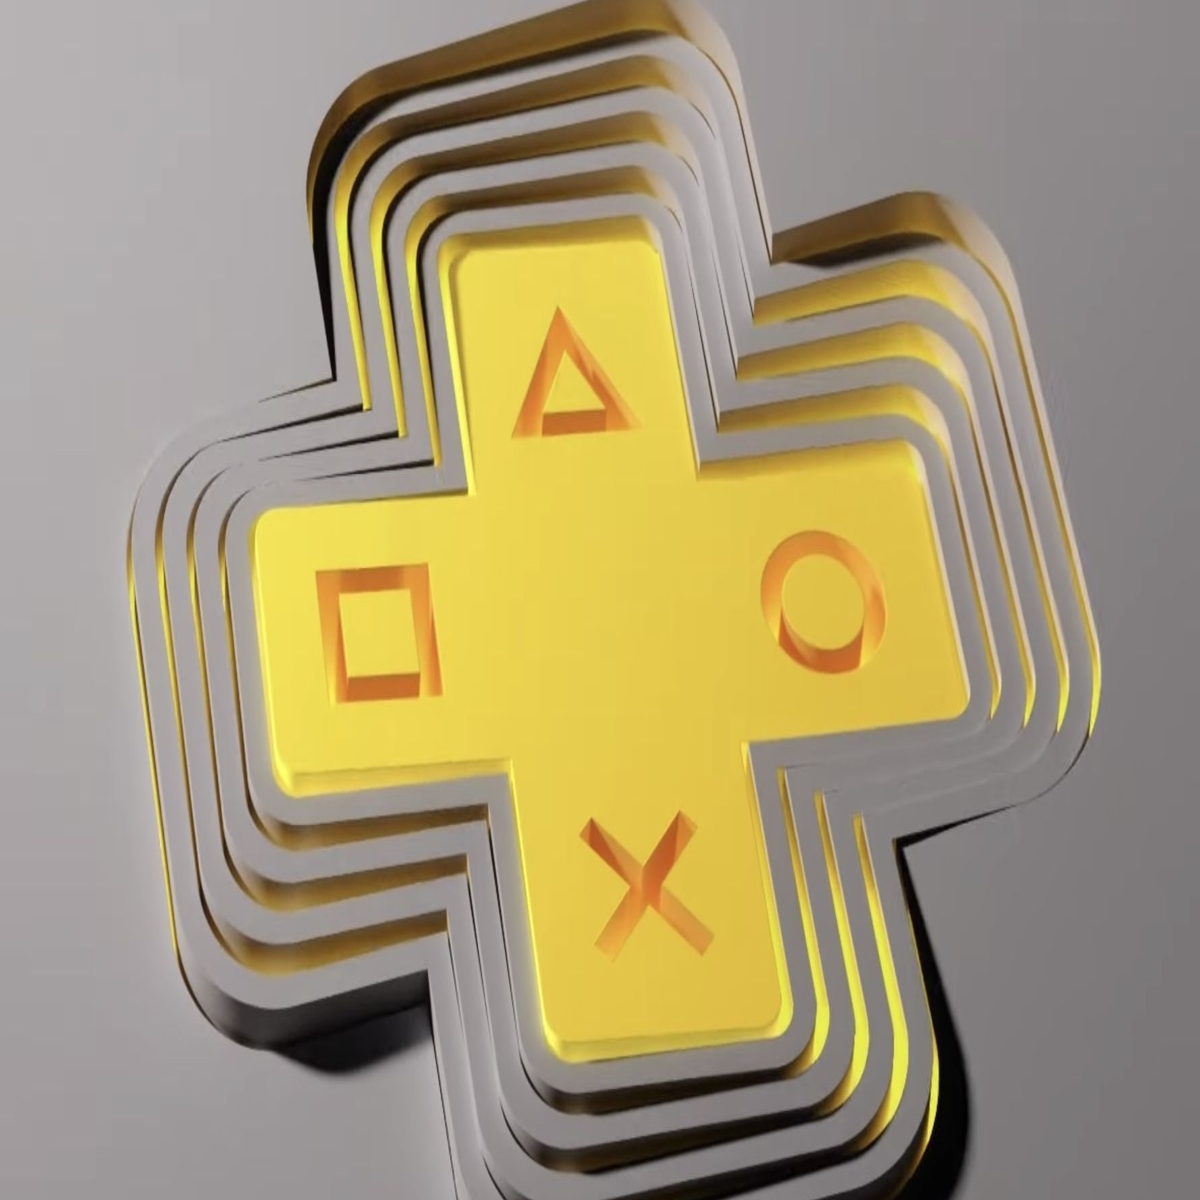 PlayStation Plus Collection: Every Free Game You Can Play On Your